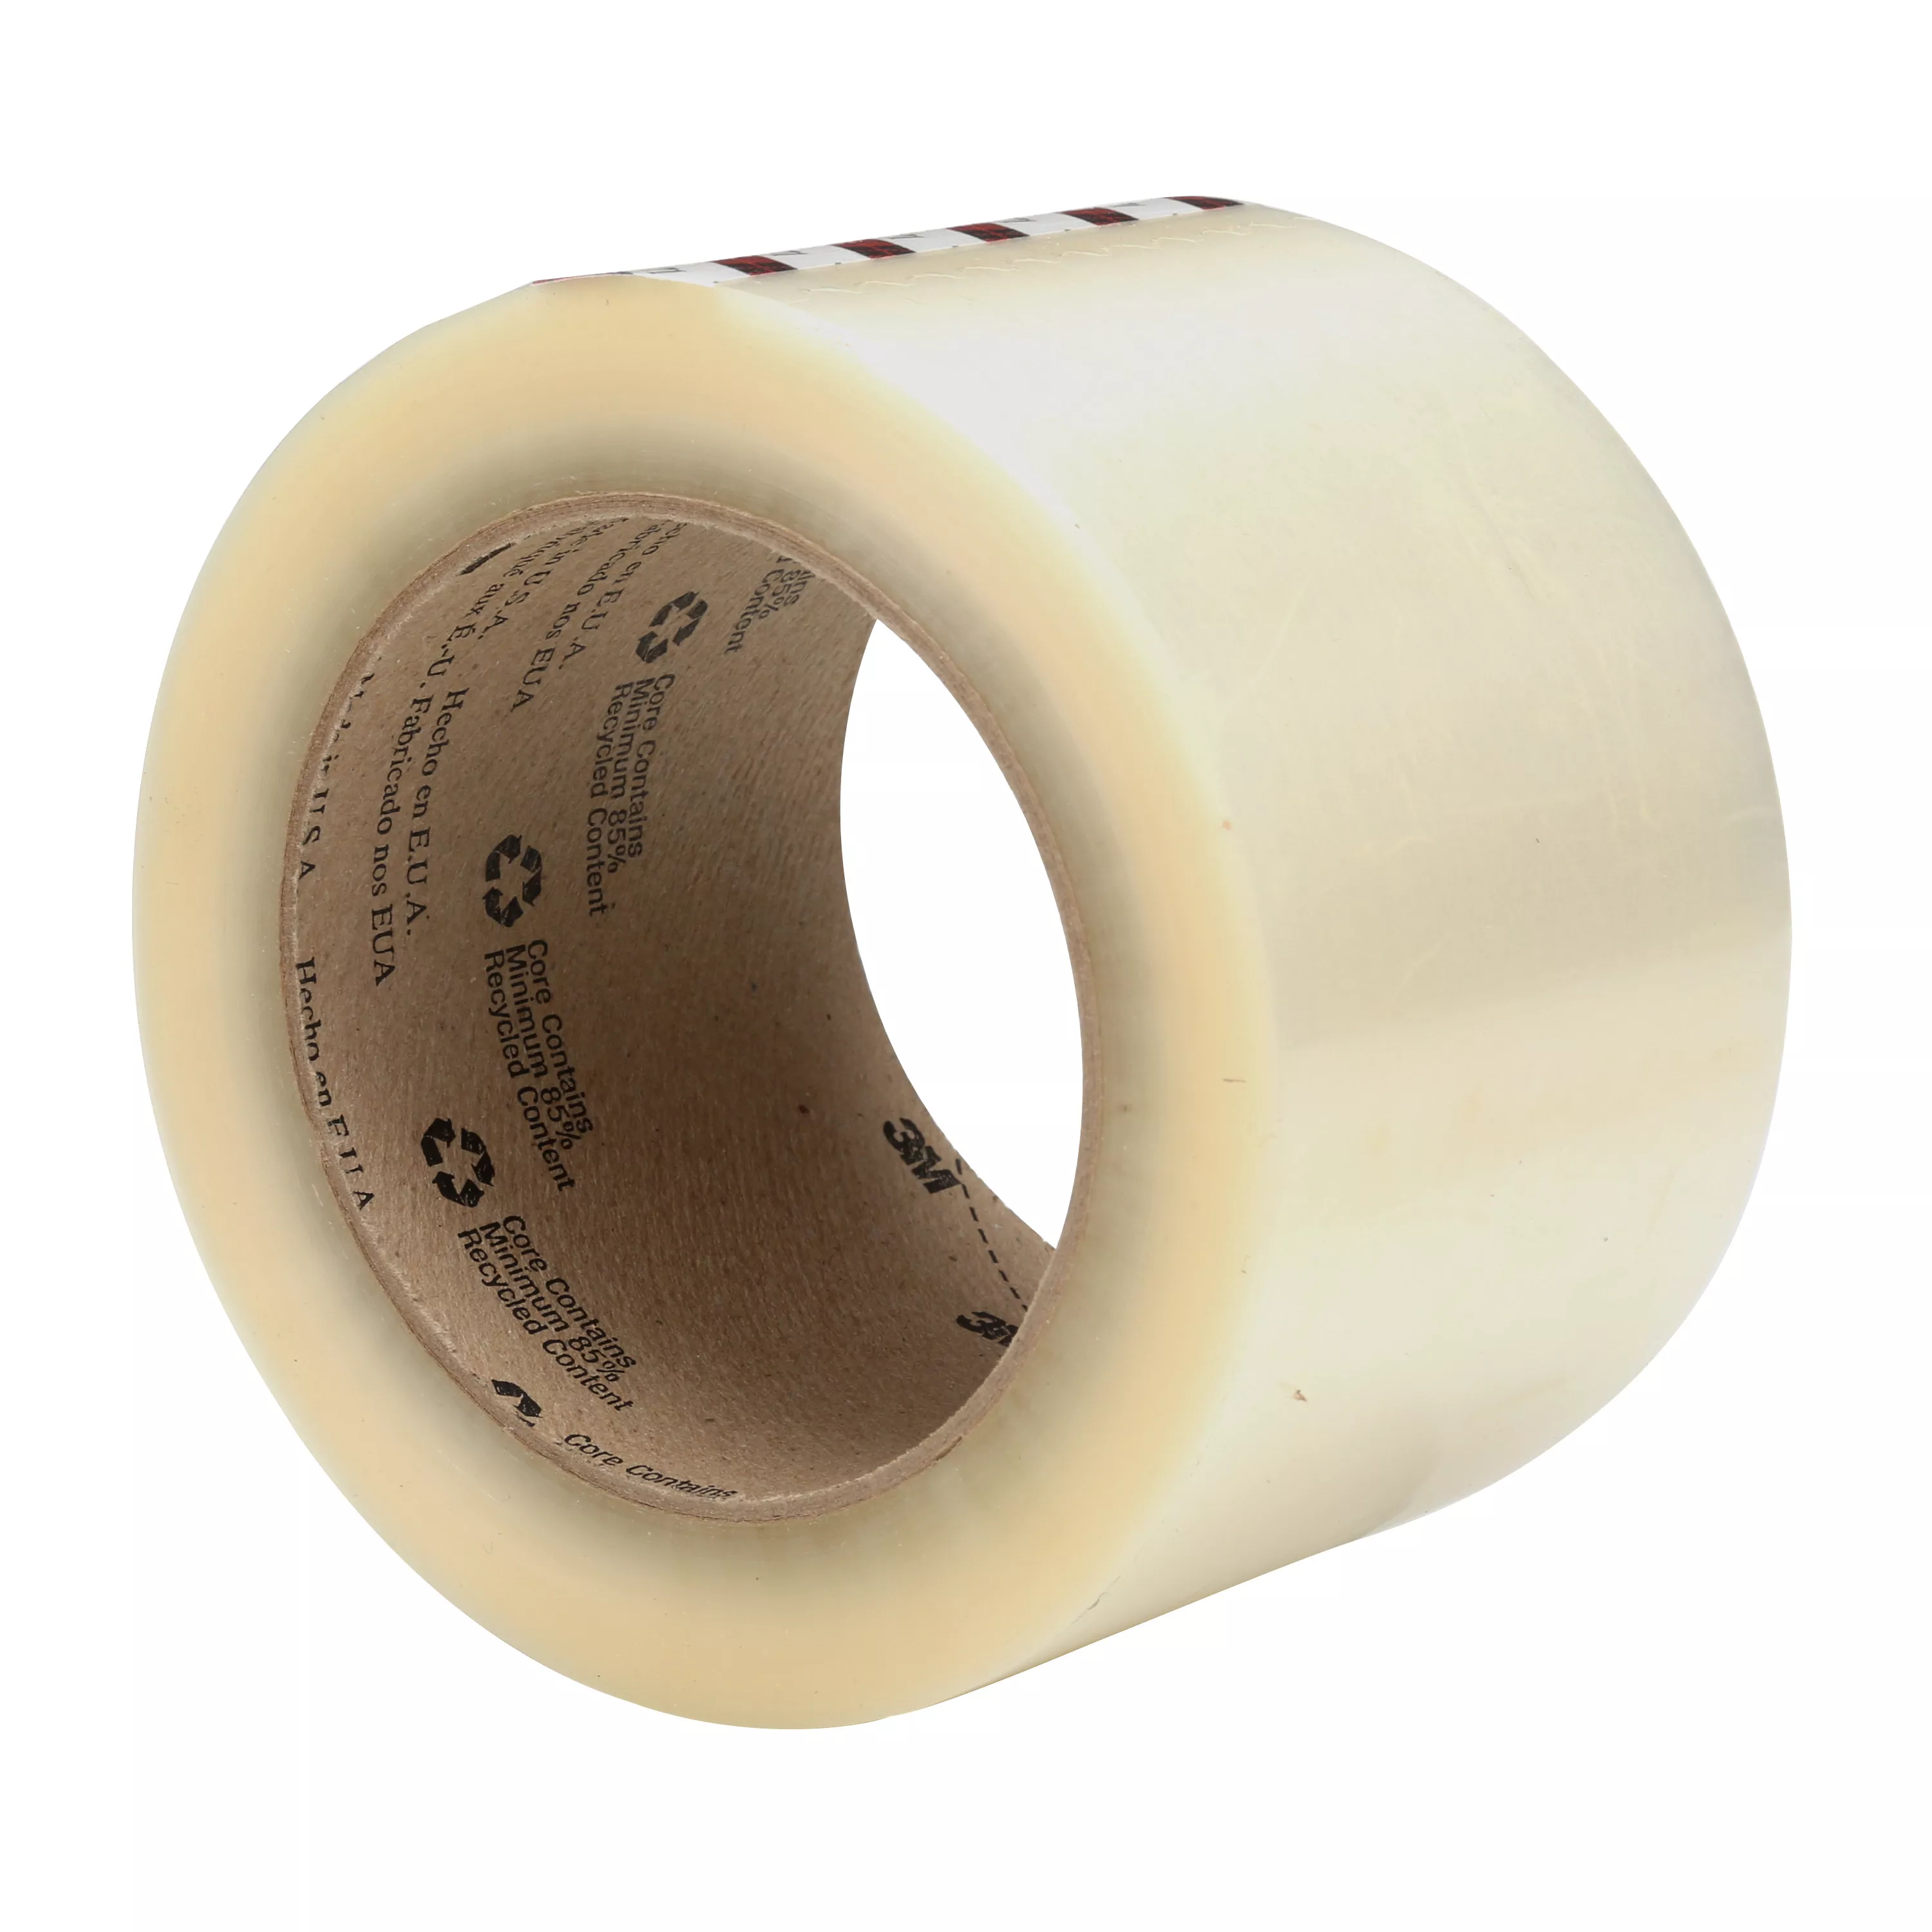 Product Number 371 | Scotch® Box Sealing Tape 371